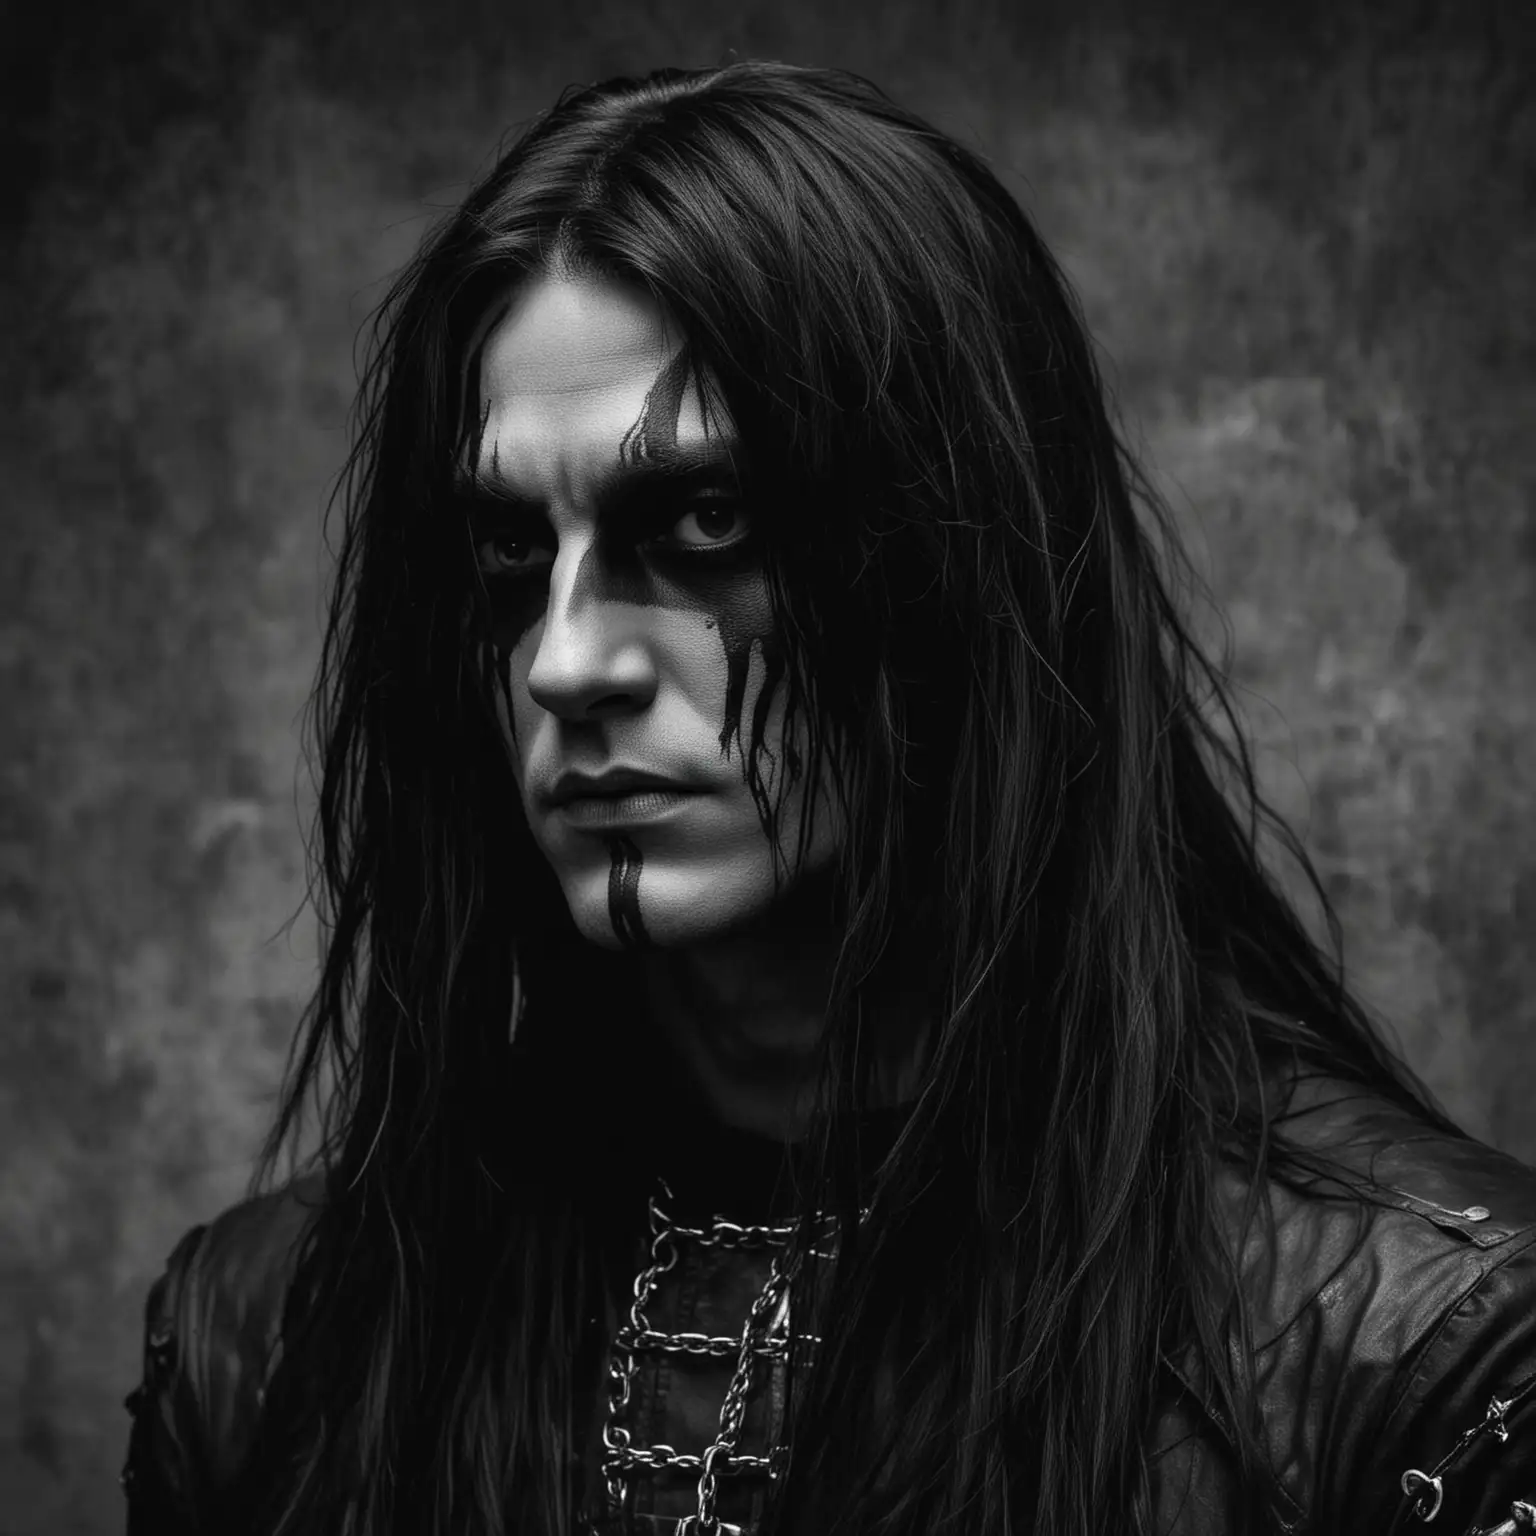 A blackmetalhead man with long black hair. The image should be inspire by 50 Shades of gray Aestethis.